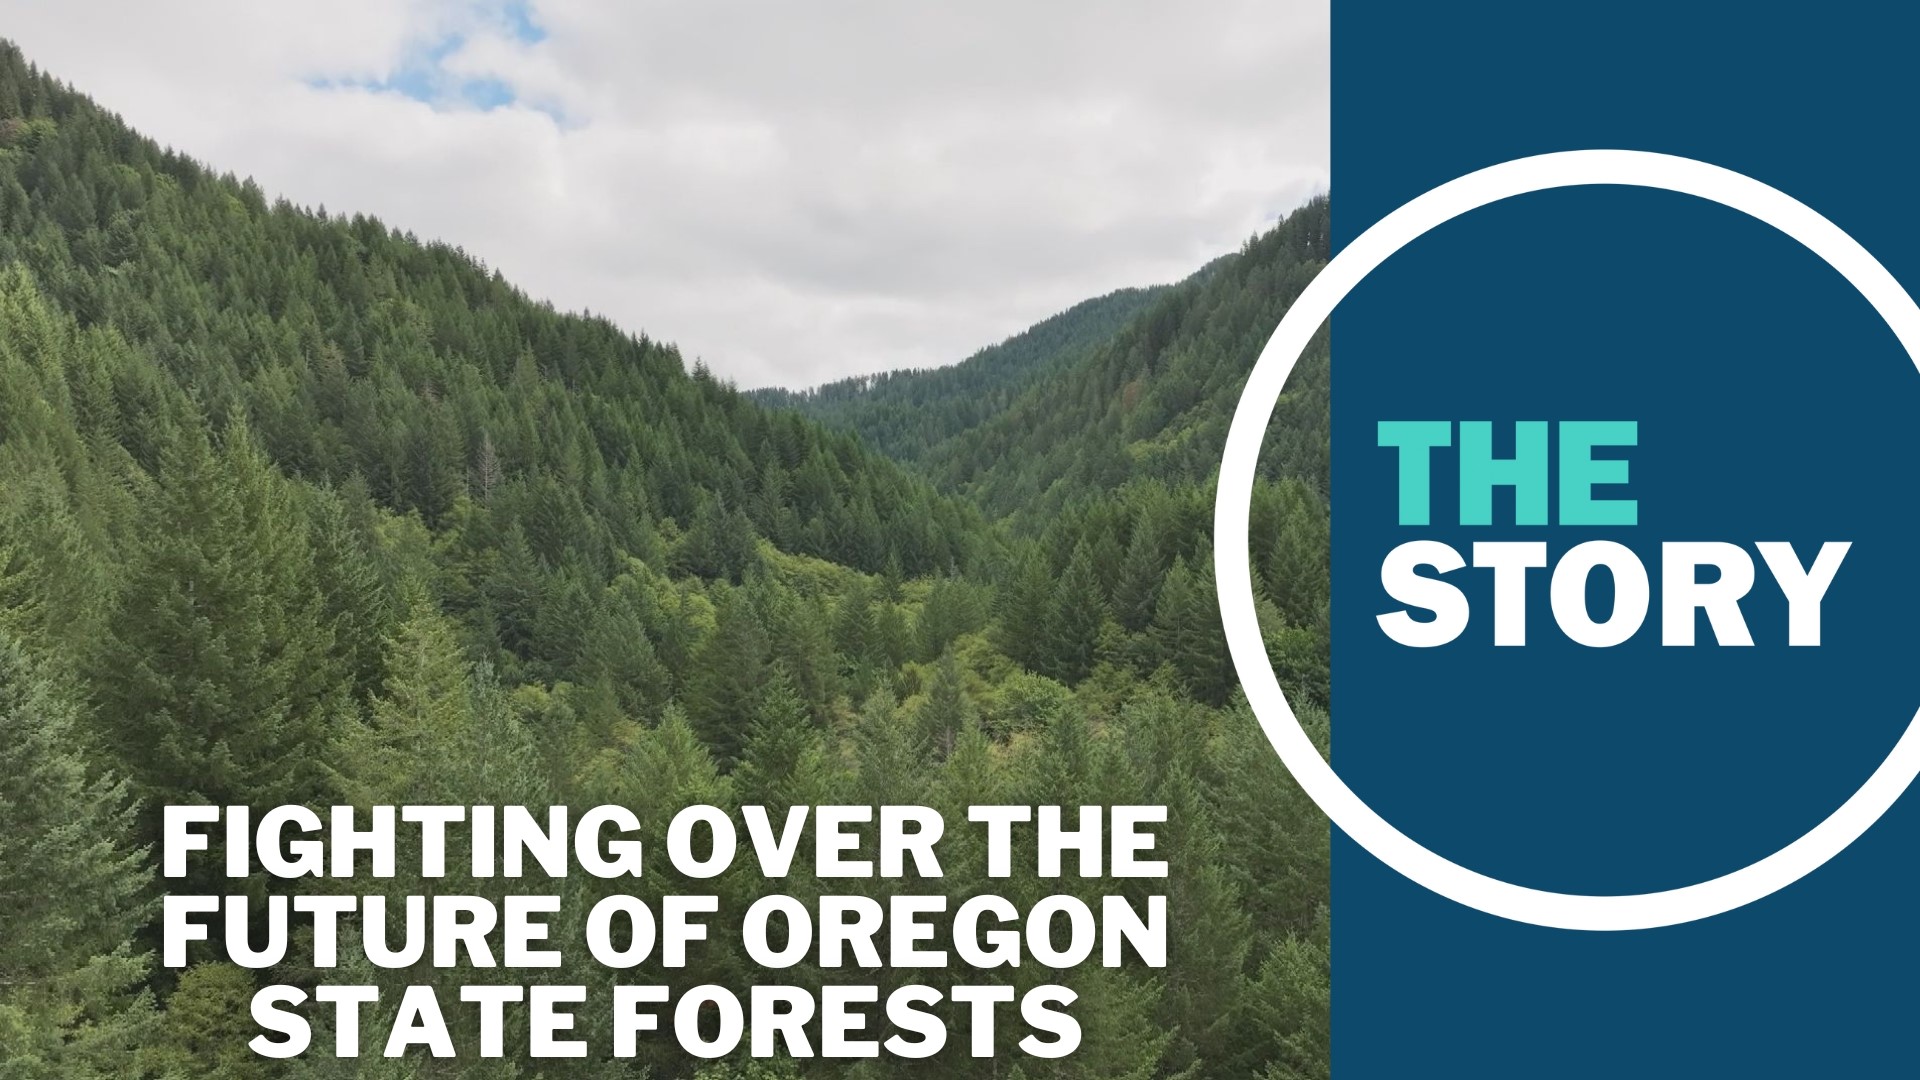 The plan would set aside some areas for endangered species and make them off limits for timber harvesting. The compromise isn't sitting well with all sides.